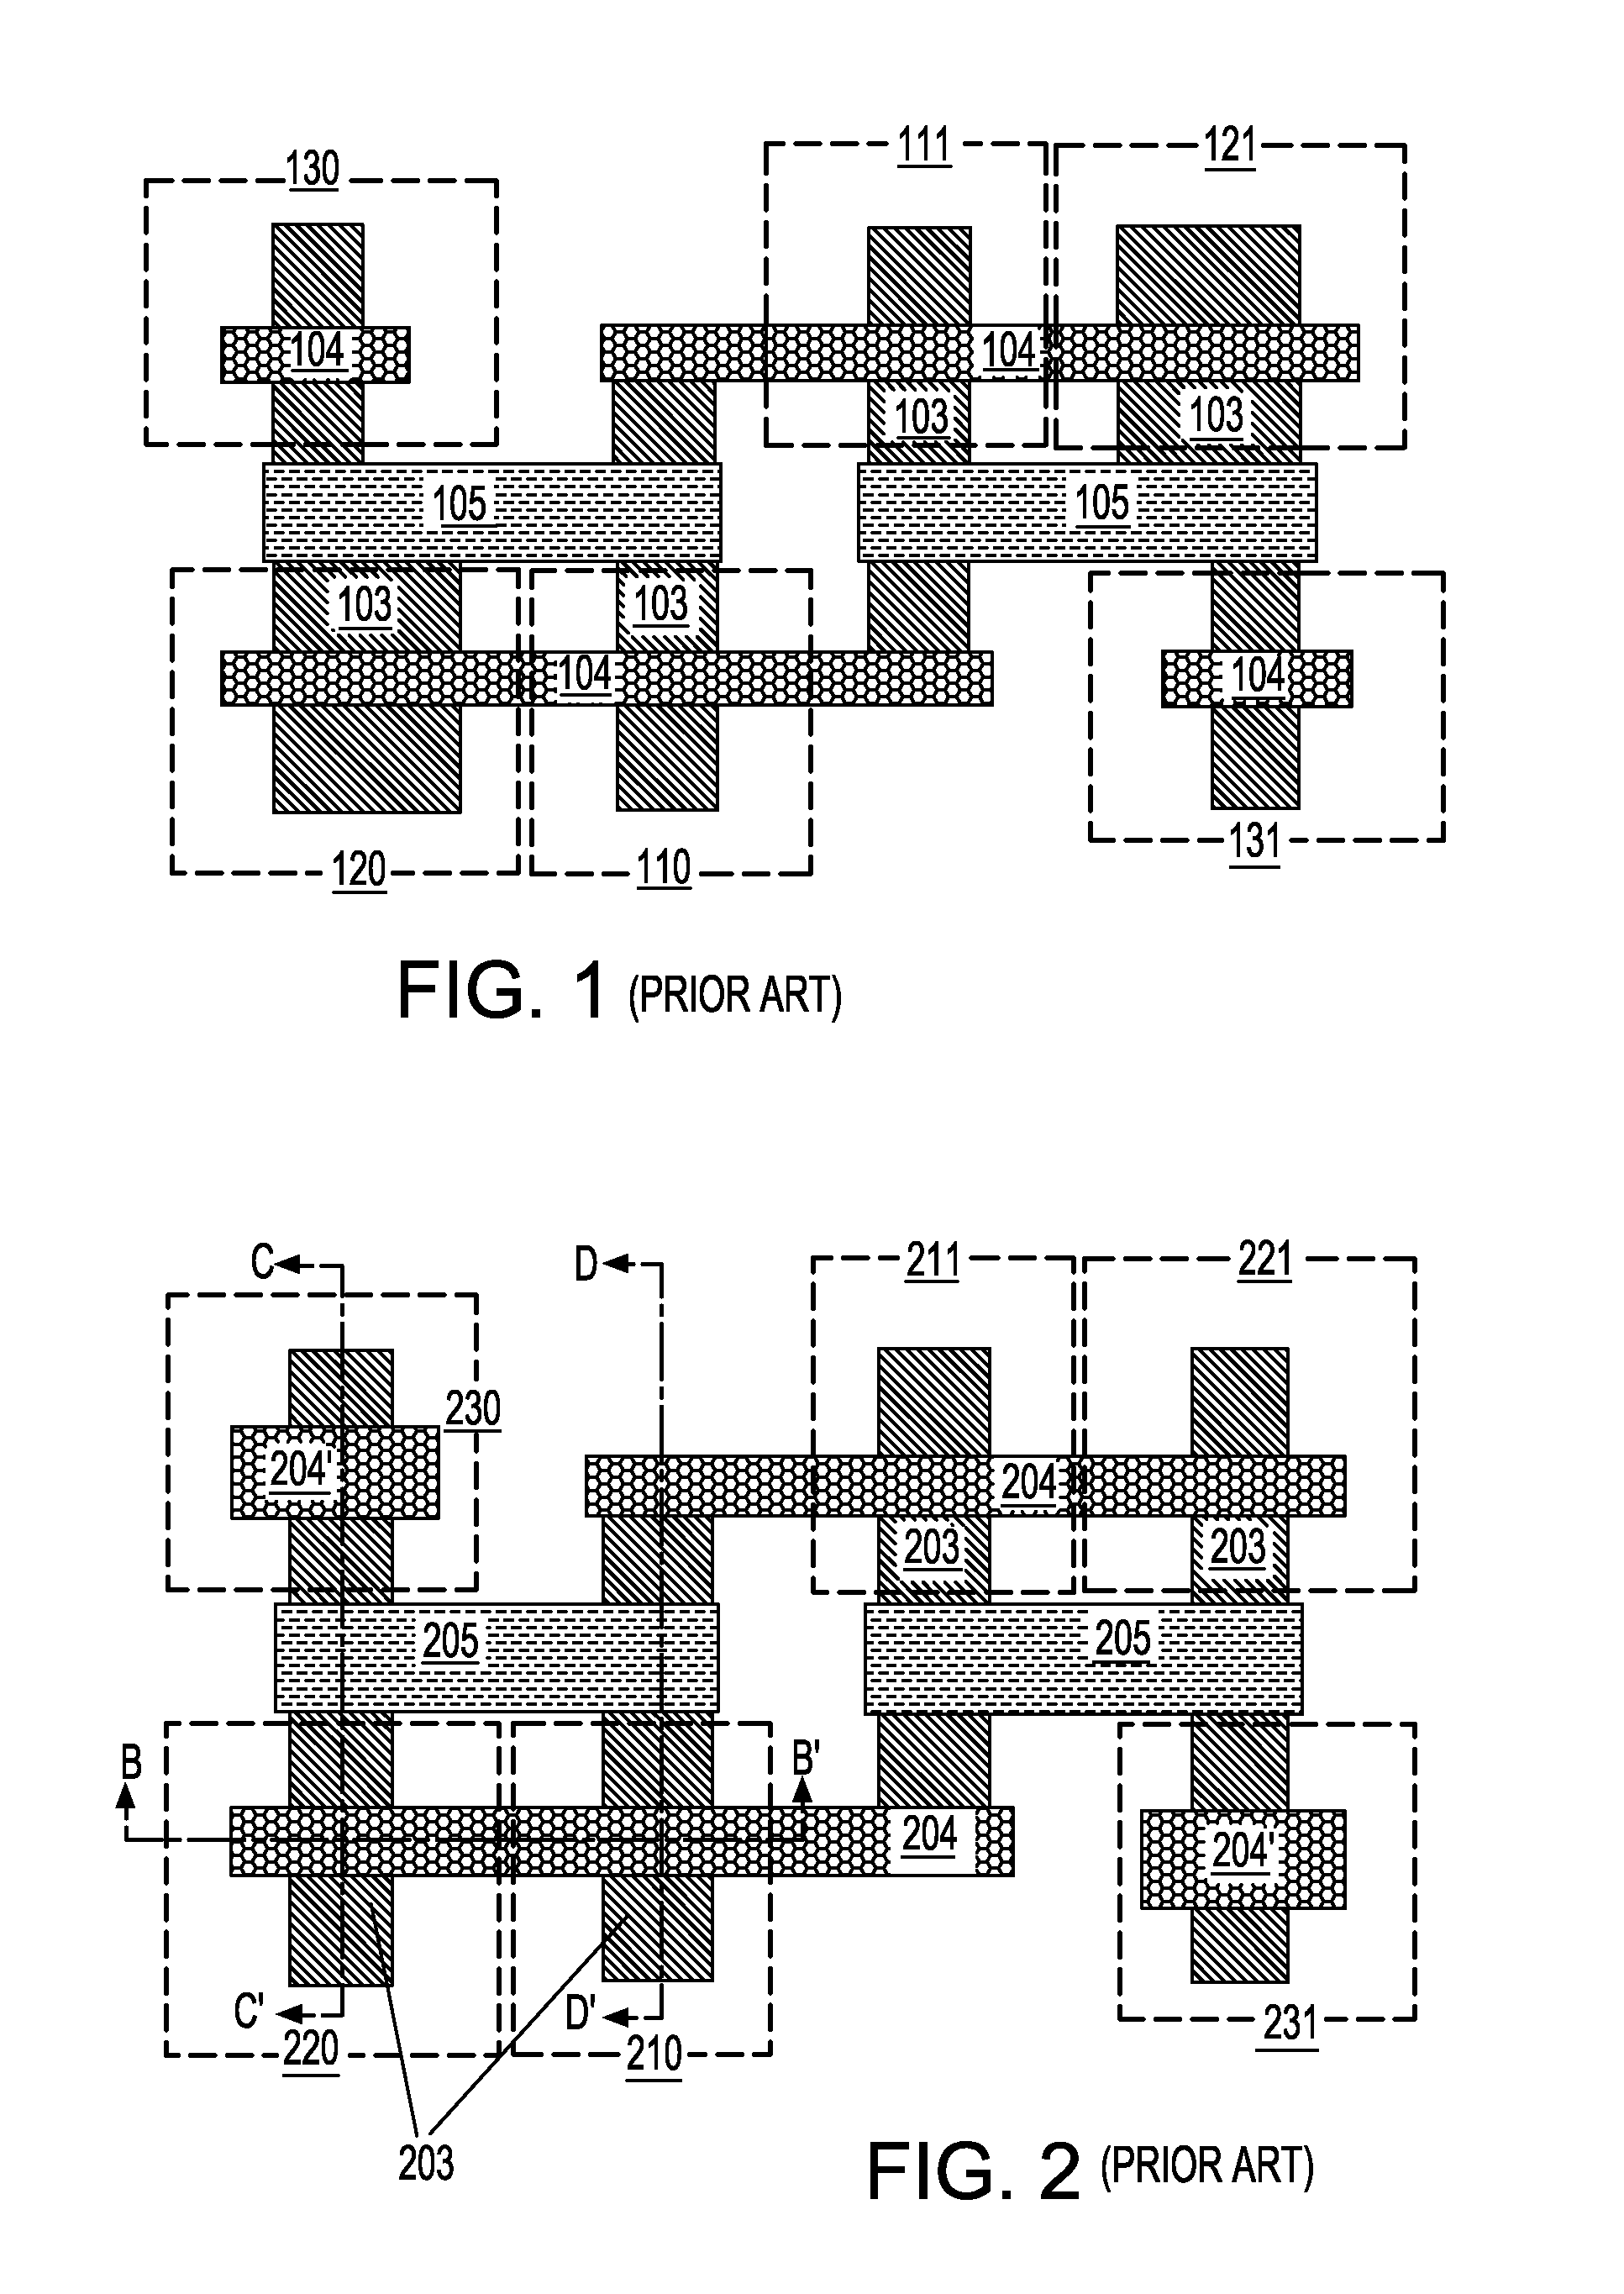 Triple gate and double gate finfets with different vertical dimension fins